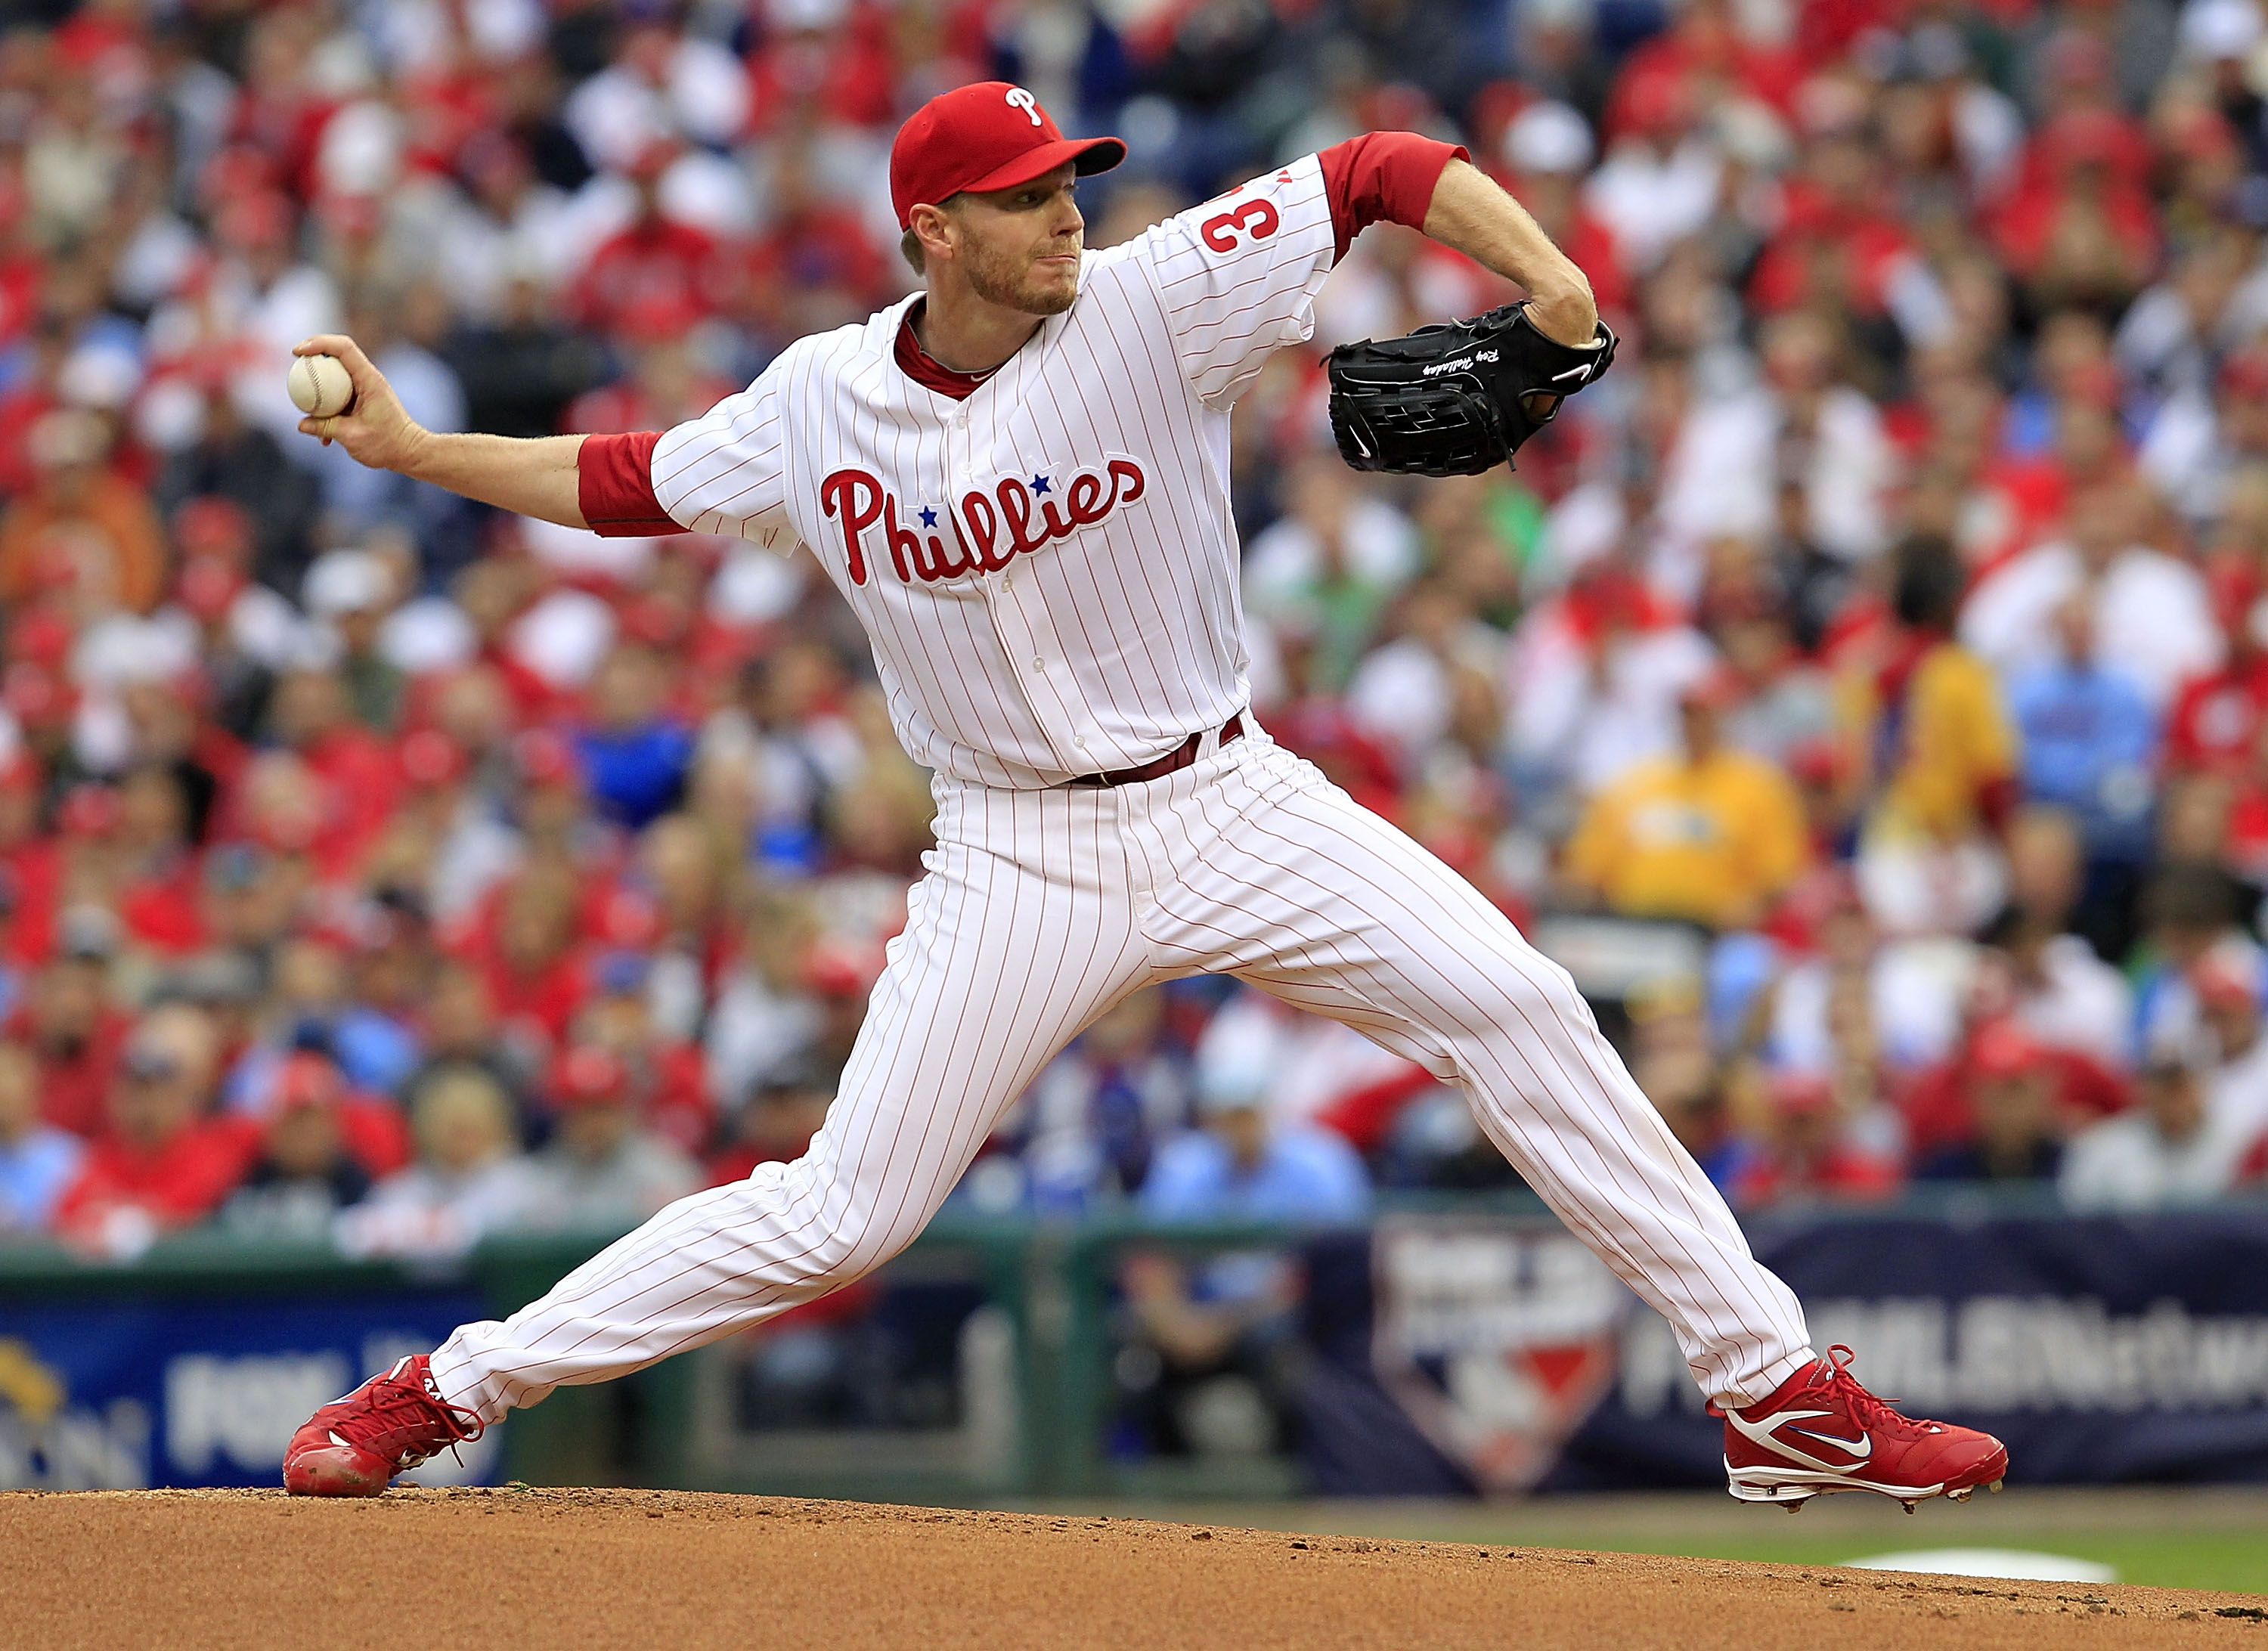 Roy Halladay Pitches Baseball's 20th Perfect Game - The New York Times